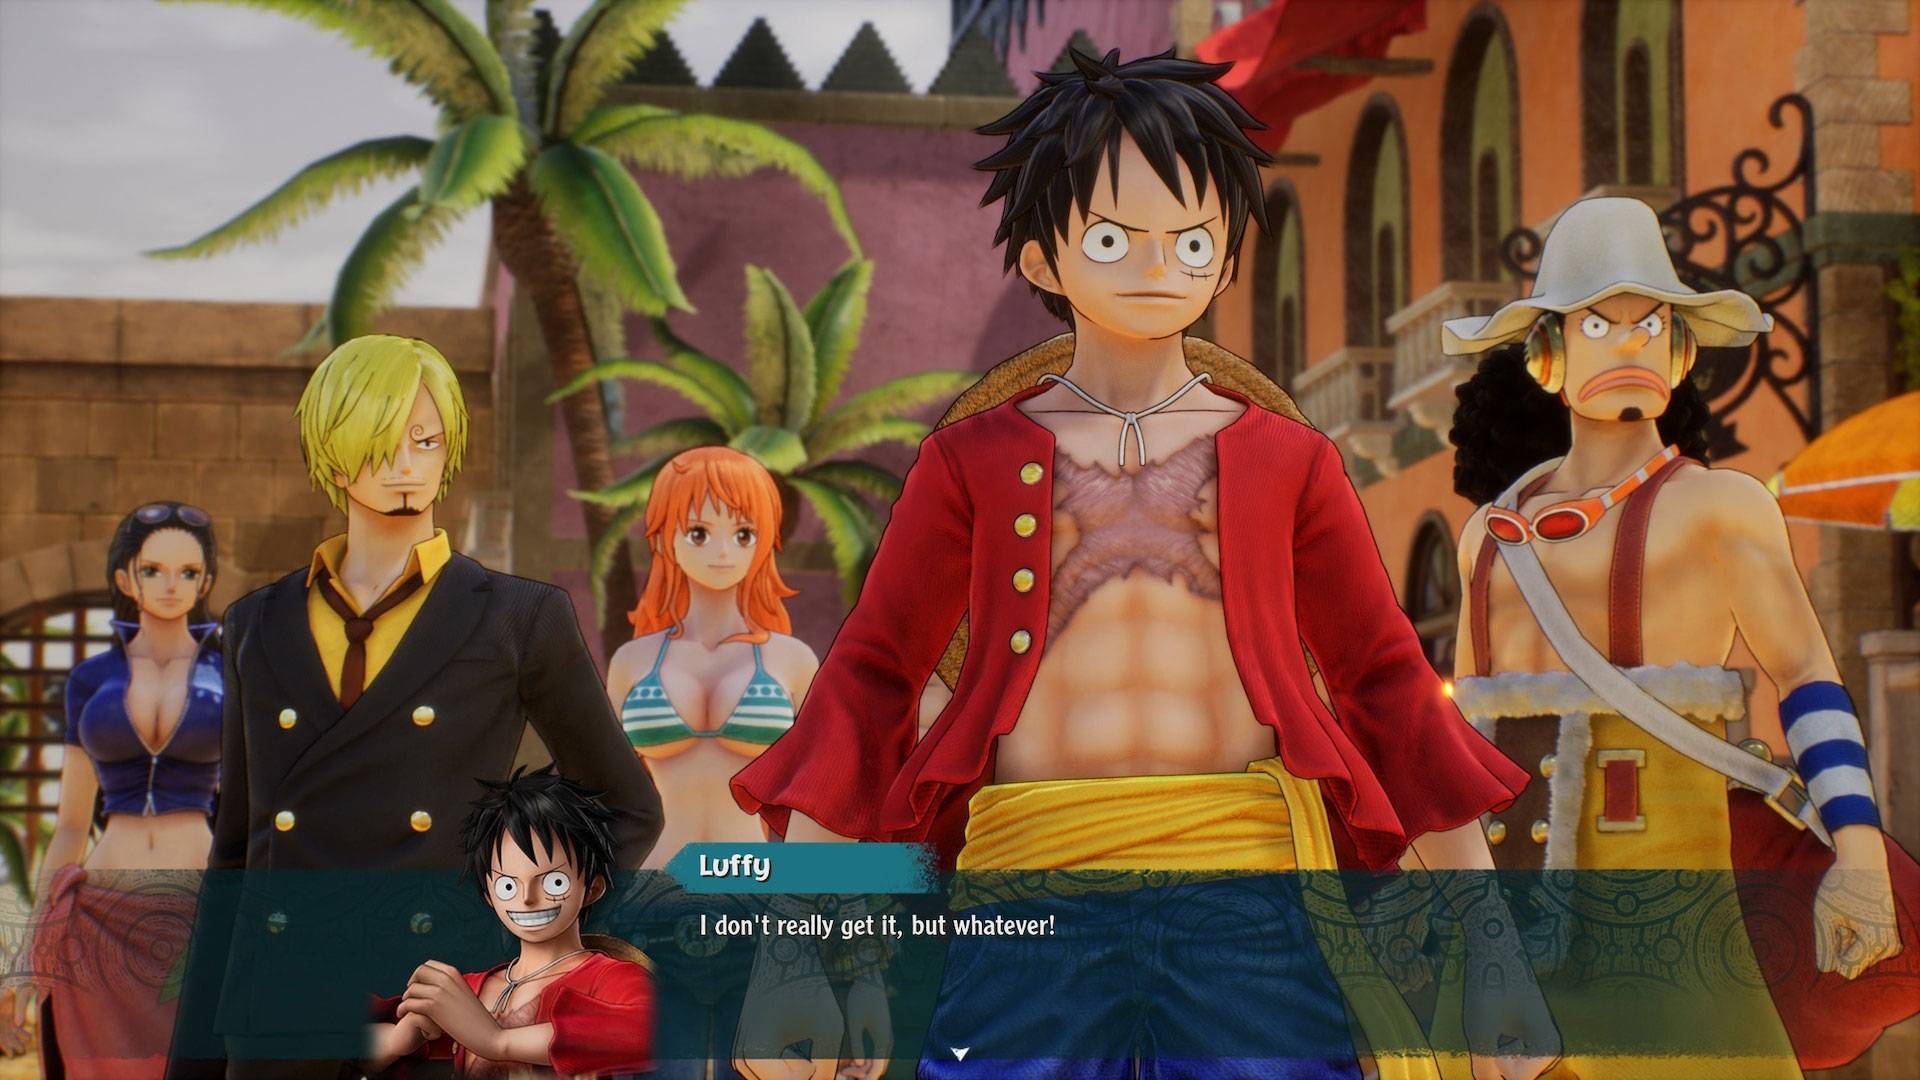 Myrmonden on X: ONE PIECE ODYSSEY Review 0/10 Game Zoro has a map, game is  unplayable #onepiece #ONEPIECE1072 #ONEPIECEODYSSEY #op #manga #anime # gaming  / X